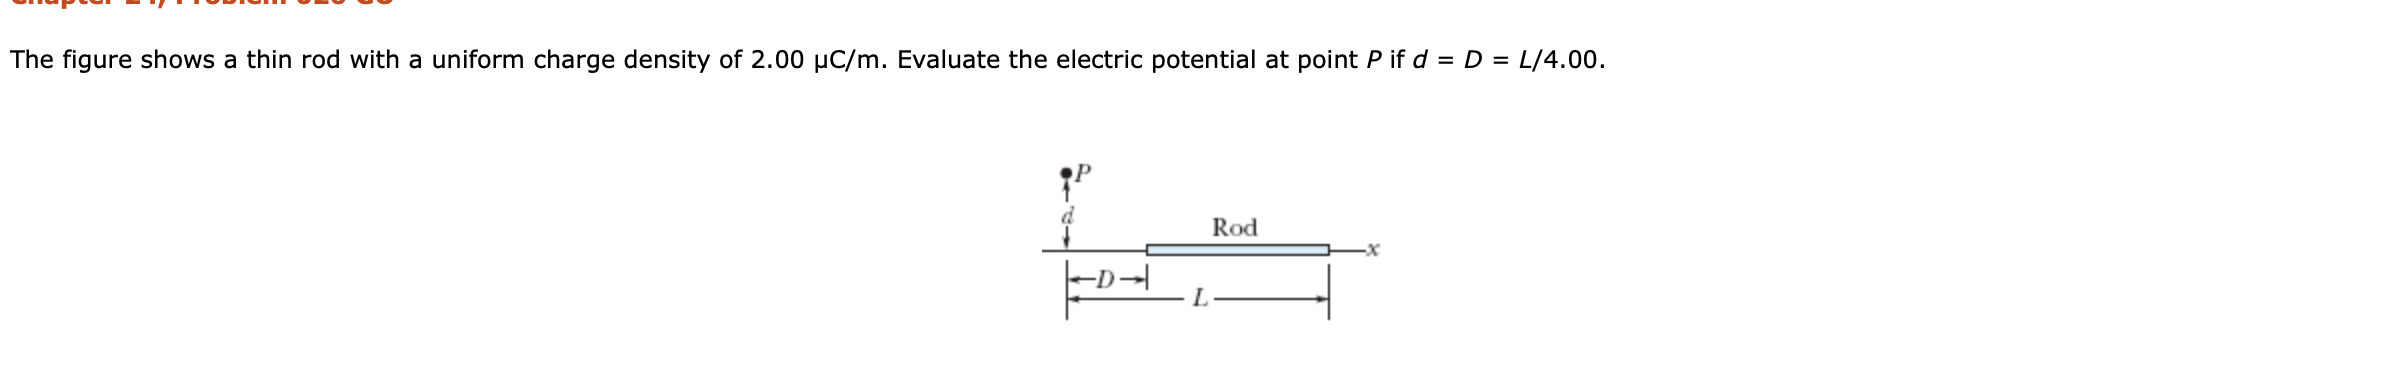 L/4.00.
The figure shows a thin rod with a uniform charge density of 2.00 µC/m. Evaluate the electric potential at point P if d = D =
d.
Rod
